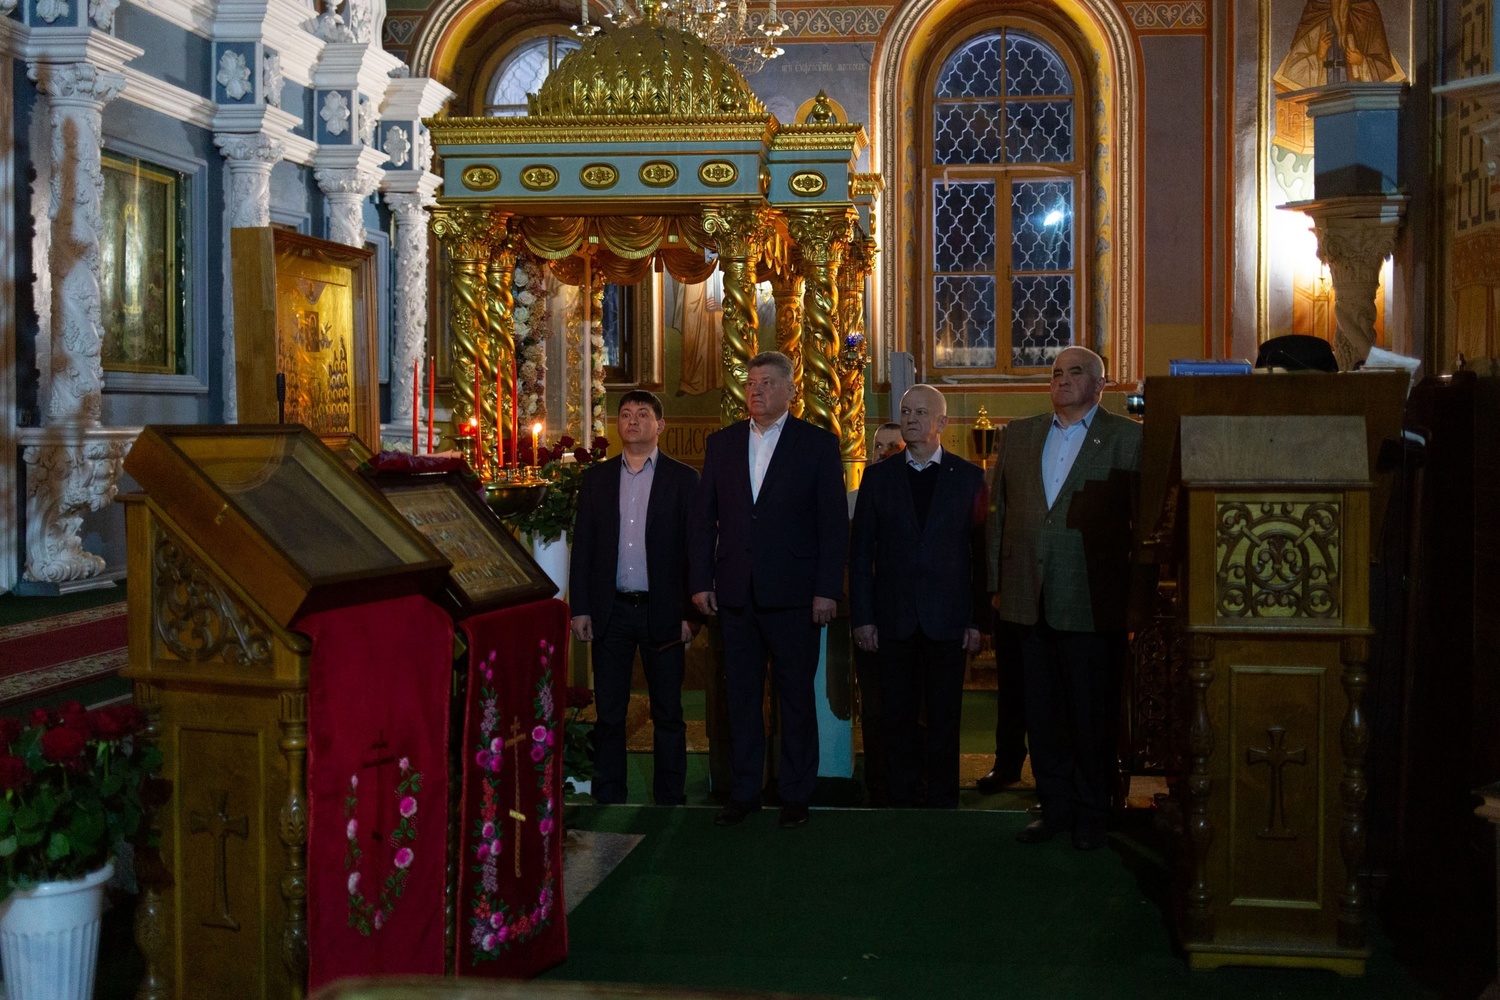 Easter services were held in Kostroma